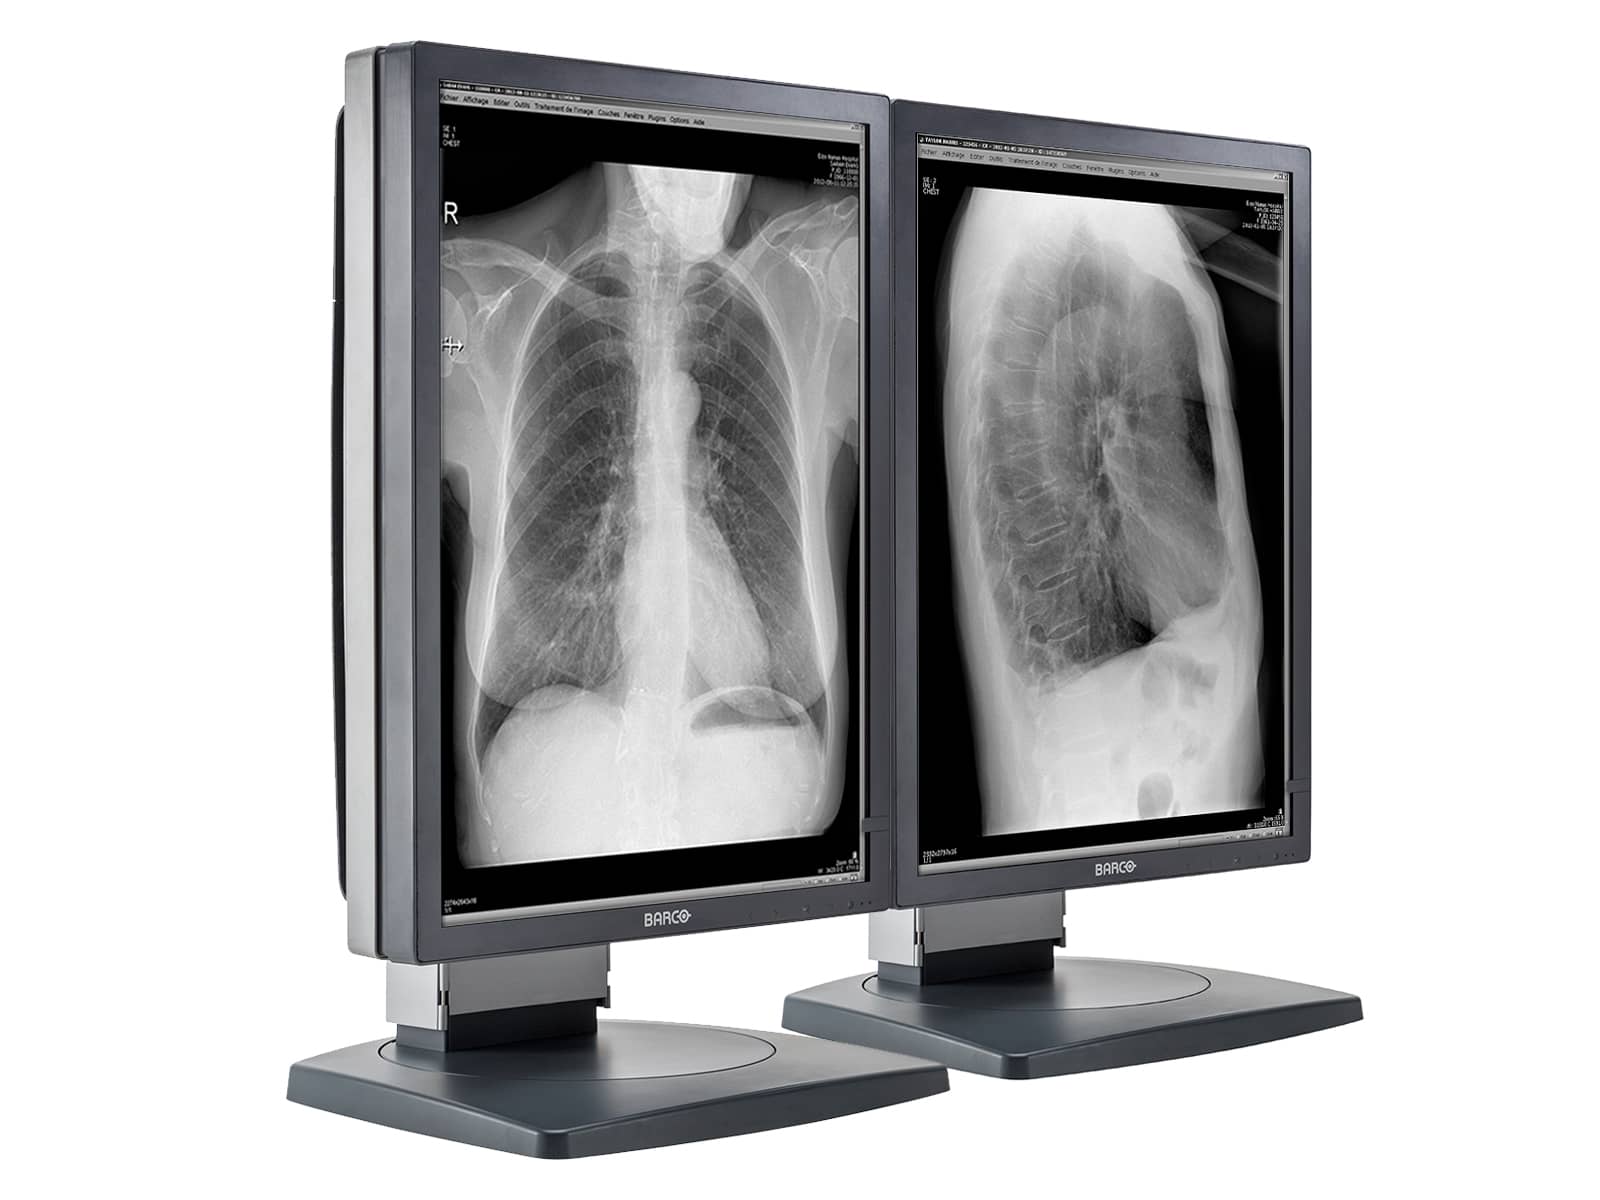 Barco Coronis MDCG-3120 21" Grayscale General Radiology Diagnostic Display (K9601662) Monitors.com 